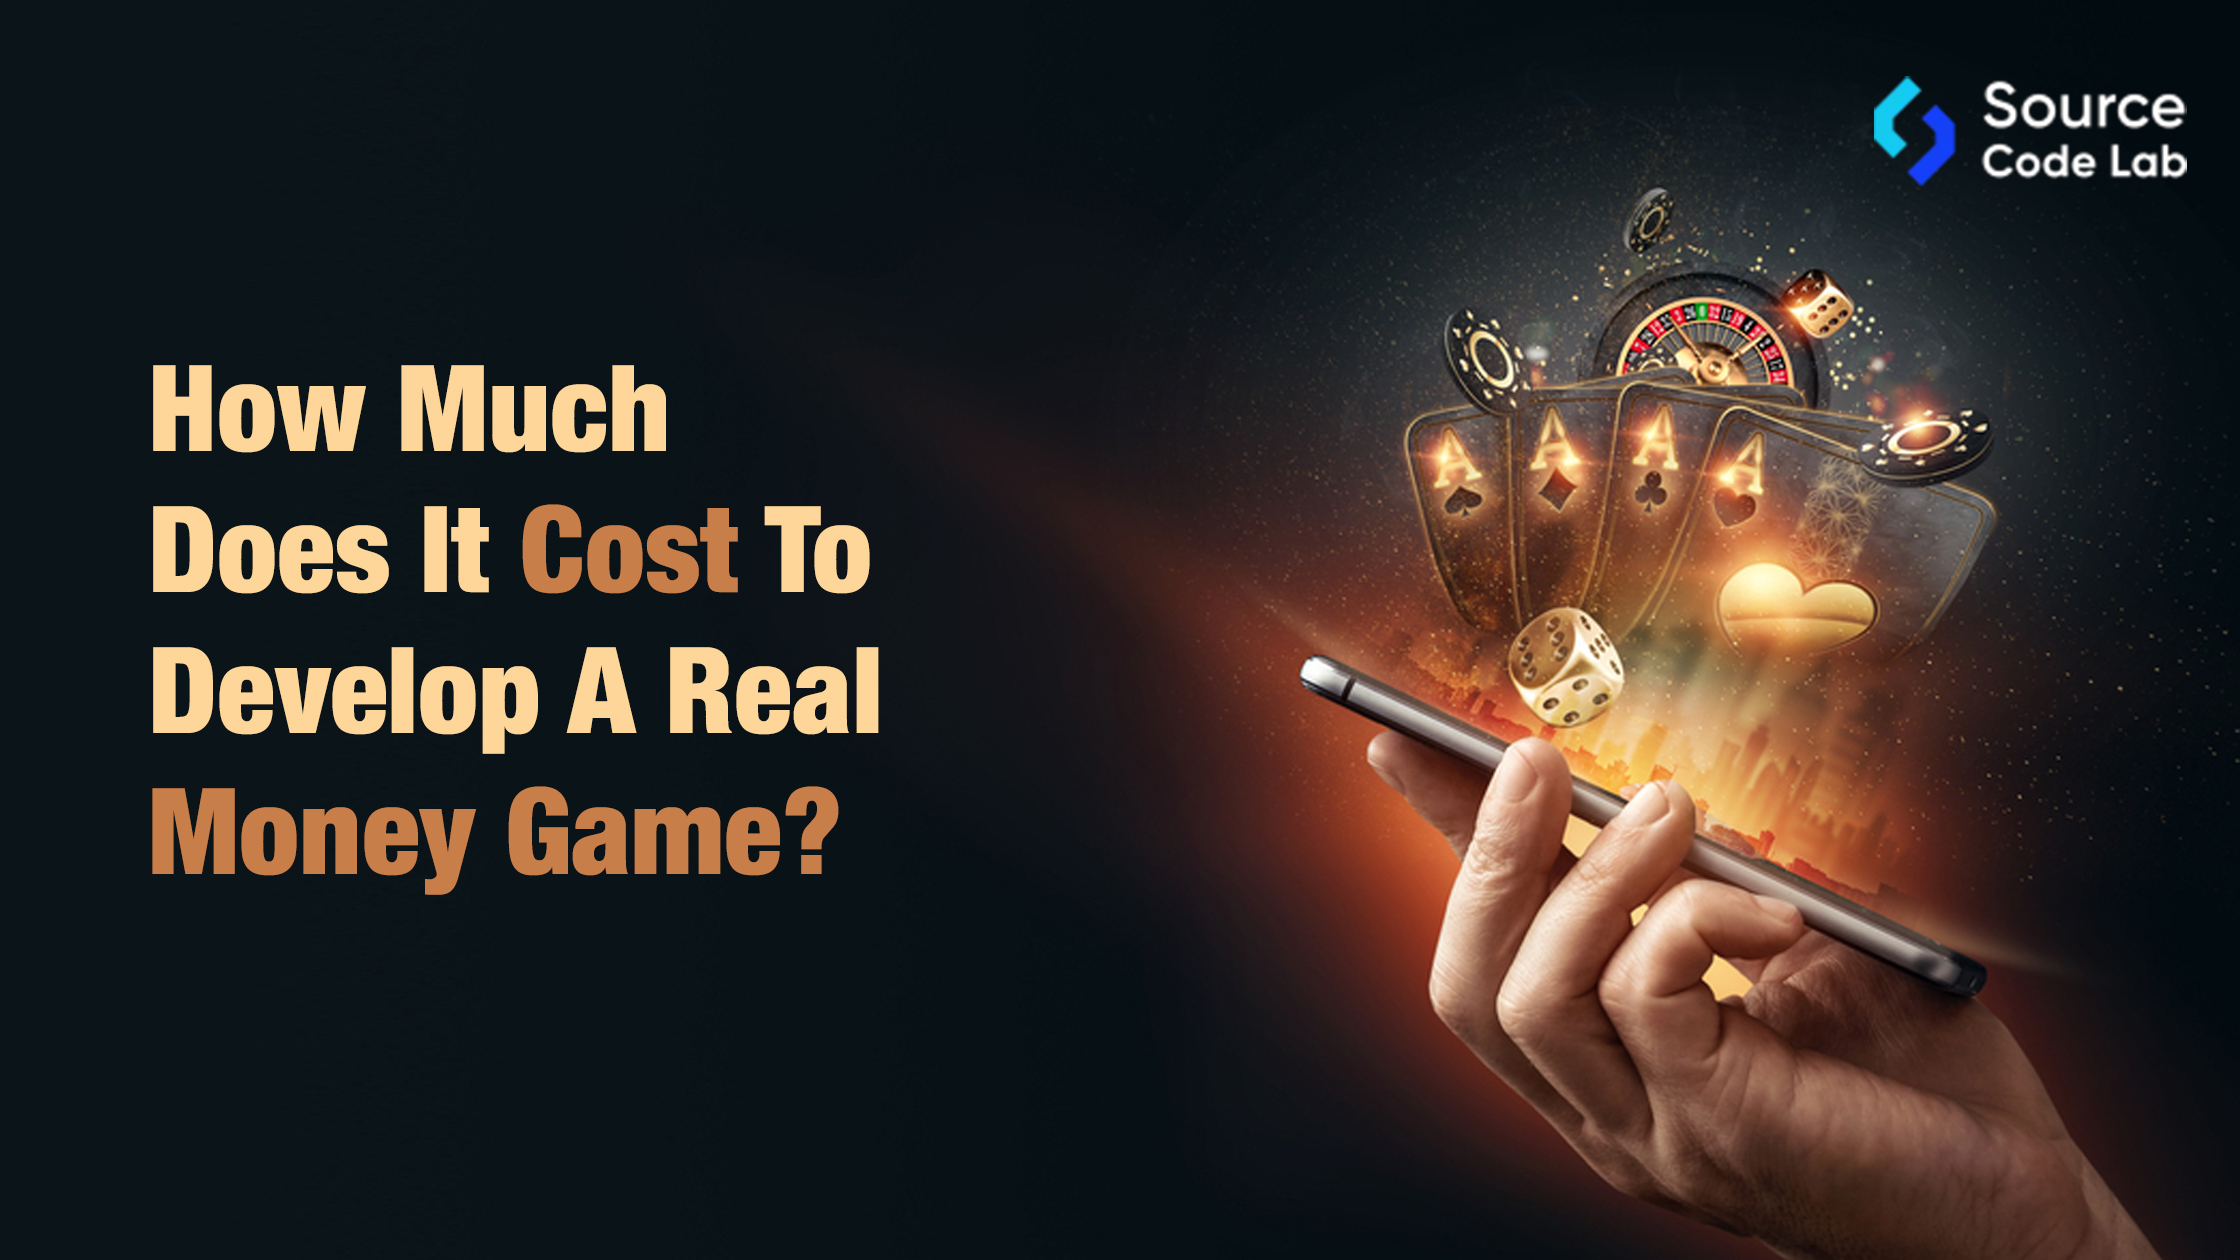 How Much Does It Cost To Develop A Real Money Game?